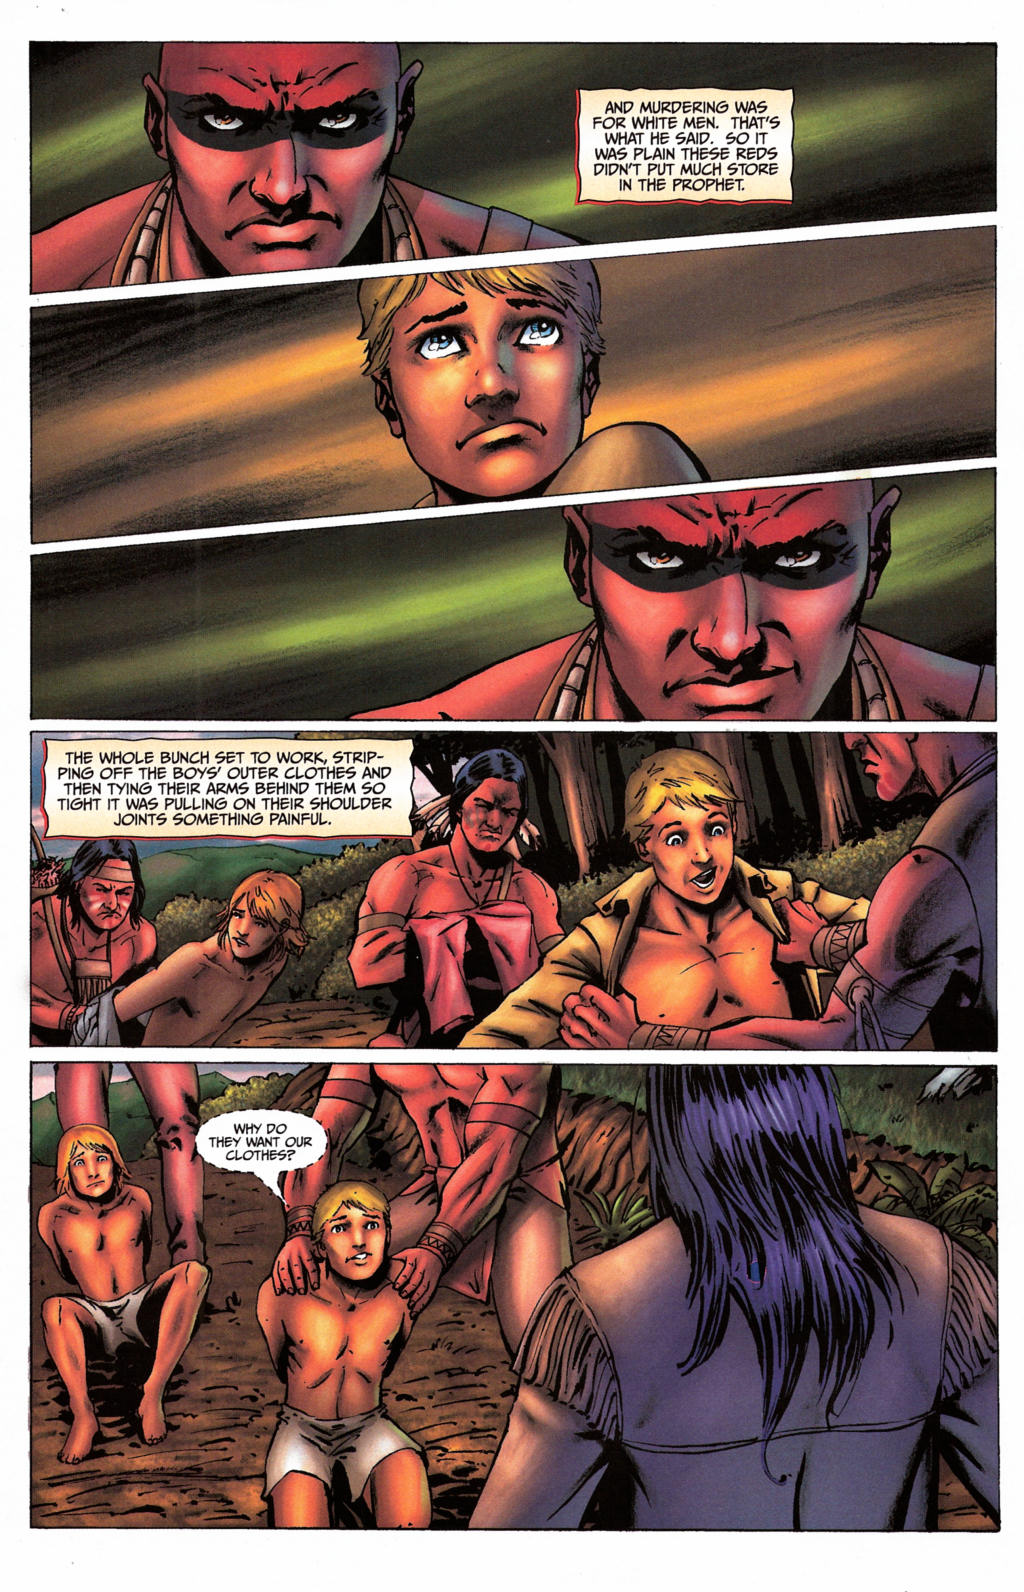 Red Prophet: The Tales of Alvin Maker issue 5 - Page 4